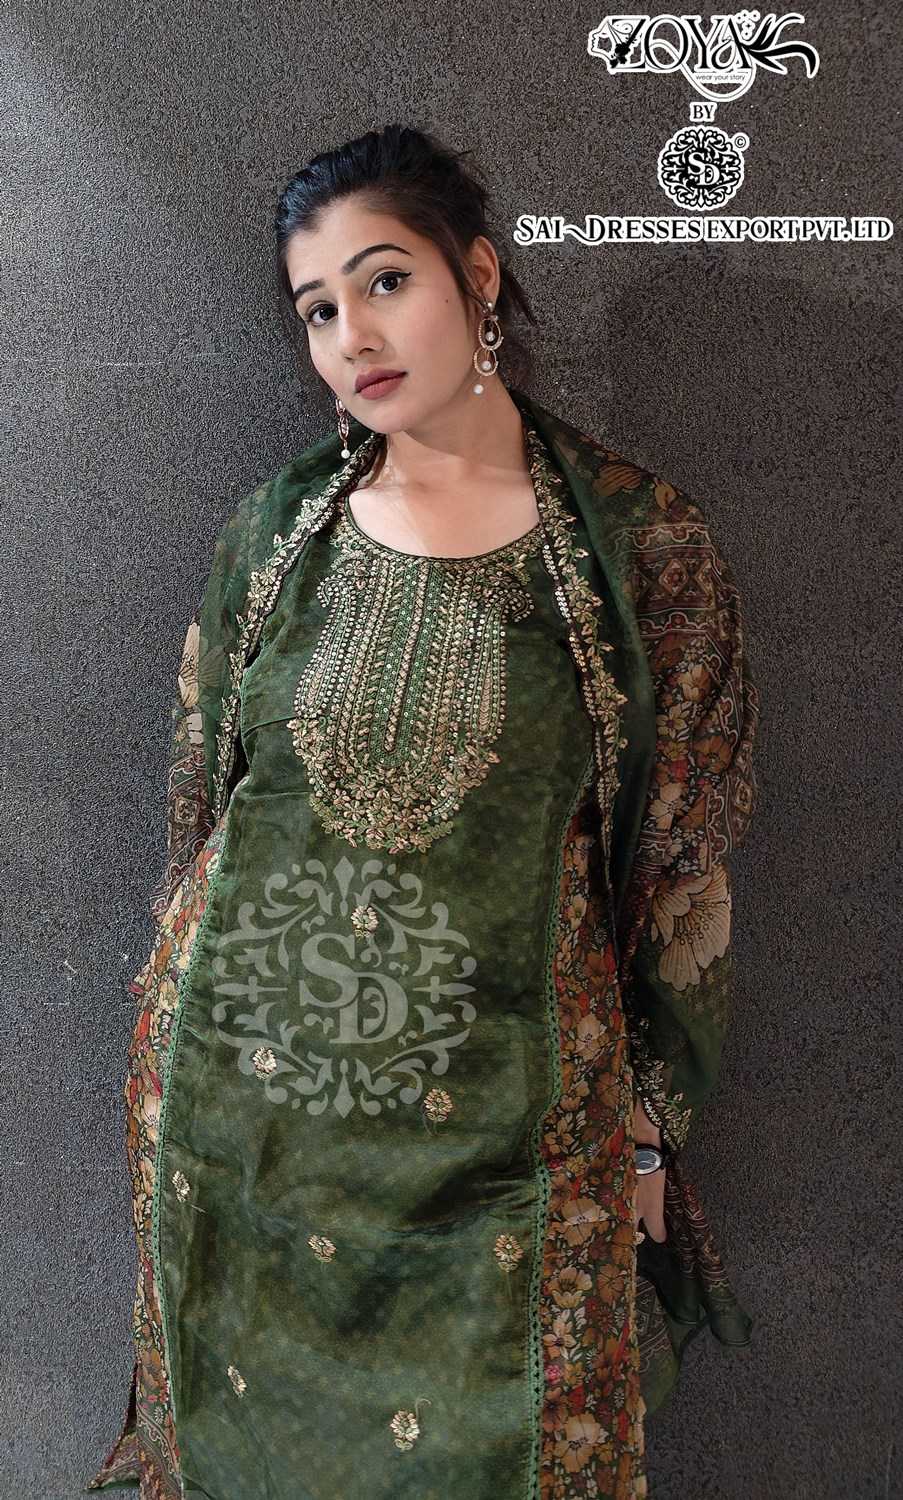 SAI DRESSES PRESENT D.NO SD1080 TO SD1083 READY TO EXCLUSIVE TRENDY WEAR DESIGNER PAKISTANI 3 PIECE CONCEPT COMBO COLLECTION IN WHOLESALE RATE IN SURAT